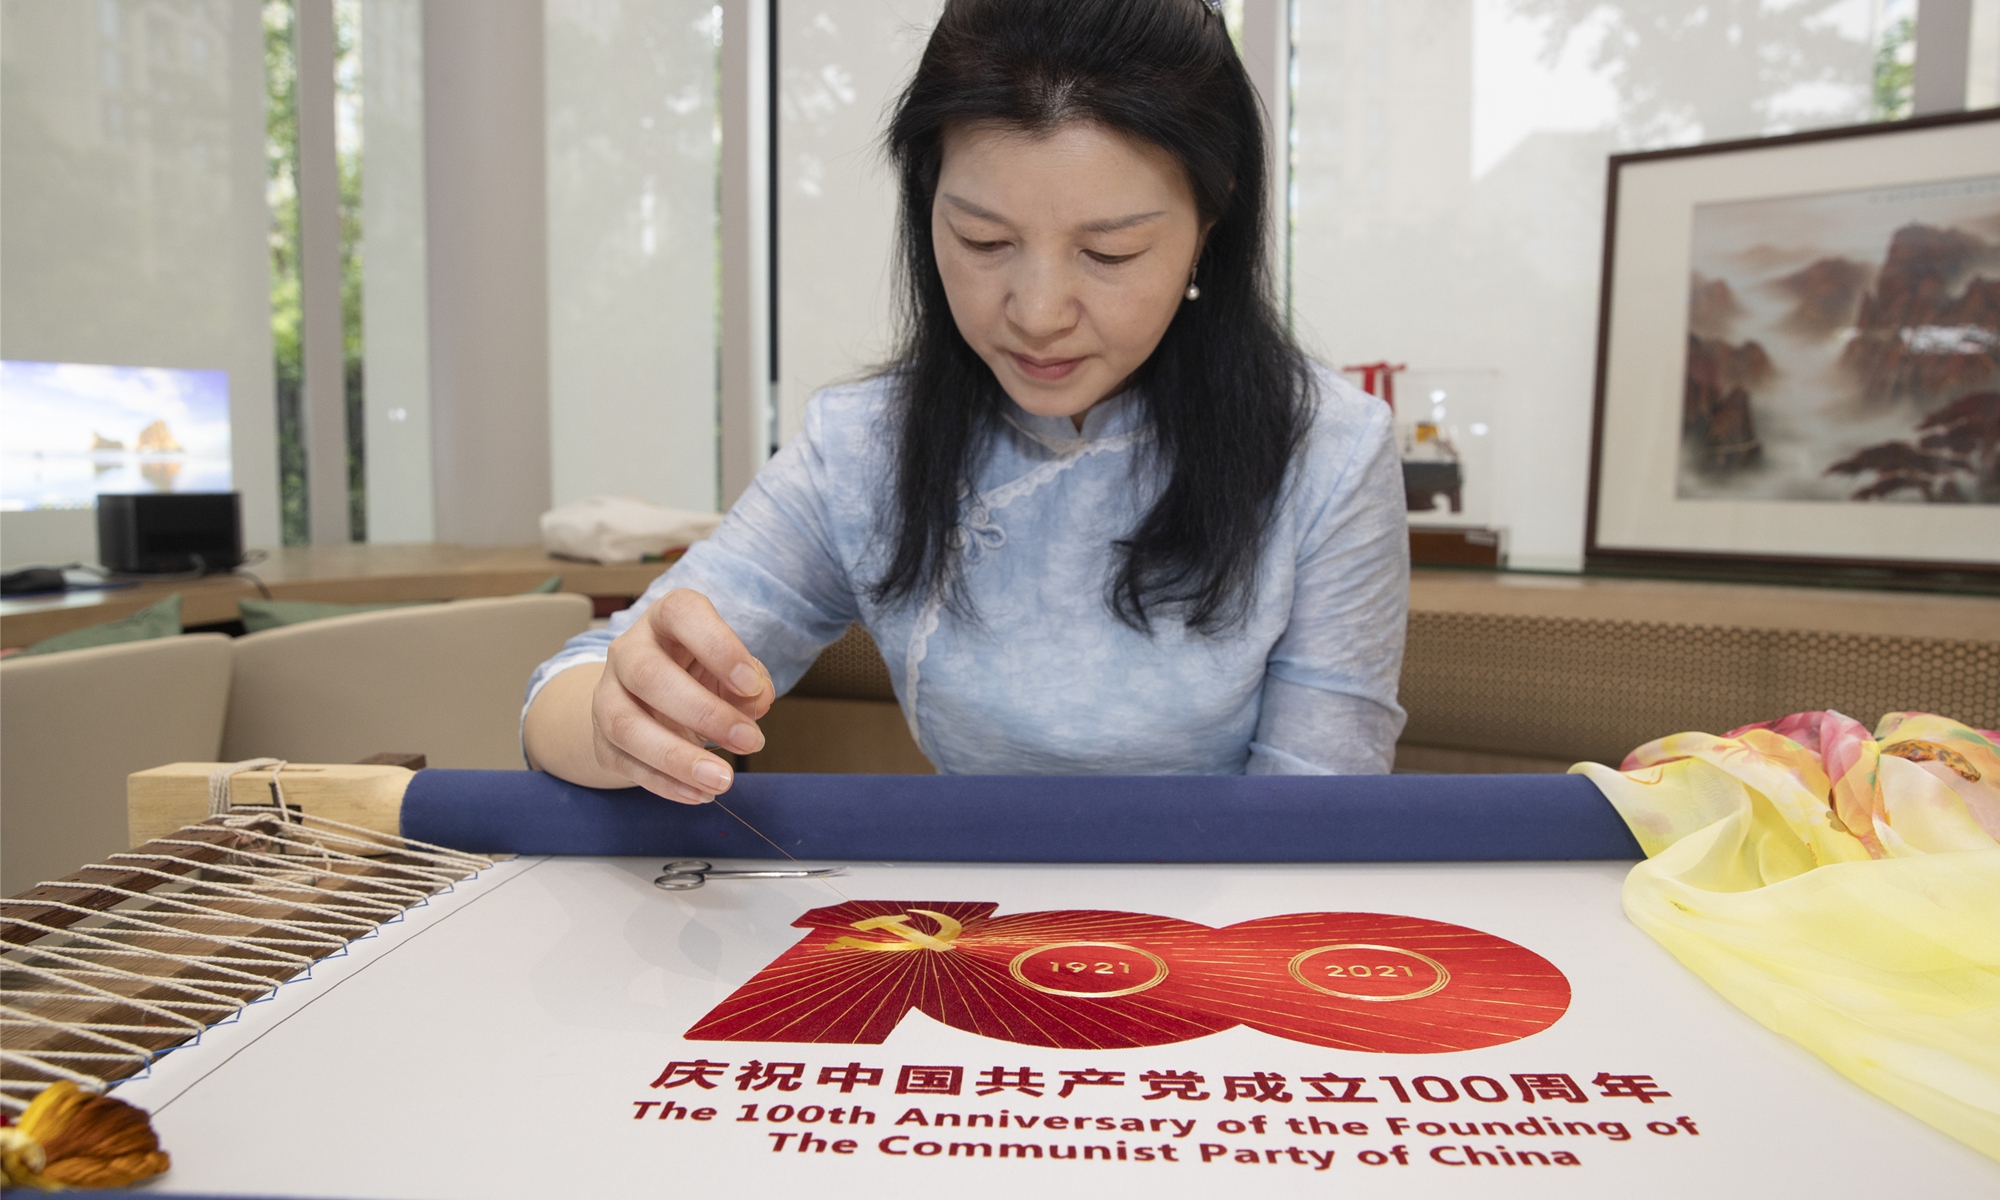 An artist embroides the celebration logo for the 100th anniversary of the founding of the CPC at a Party services center in Wuxi, East China's Jiangsu Province on June 19. Photo: cnsphoto